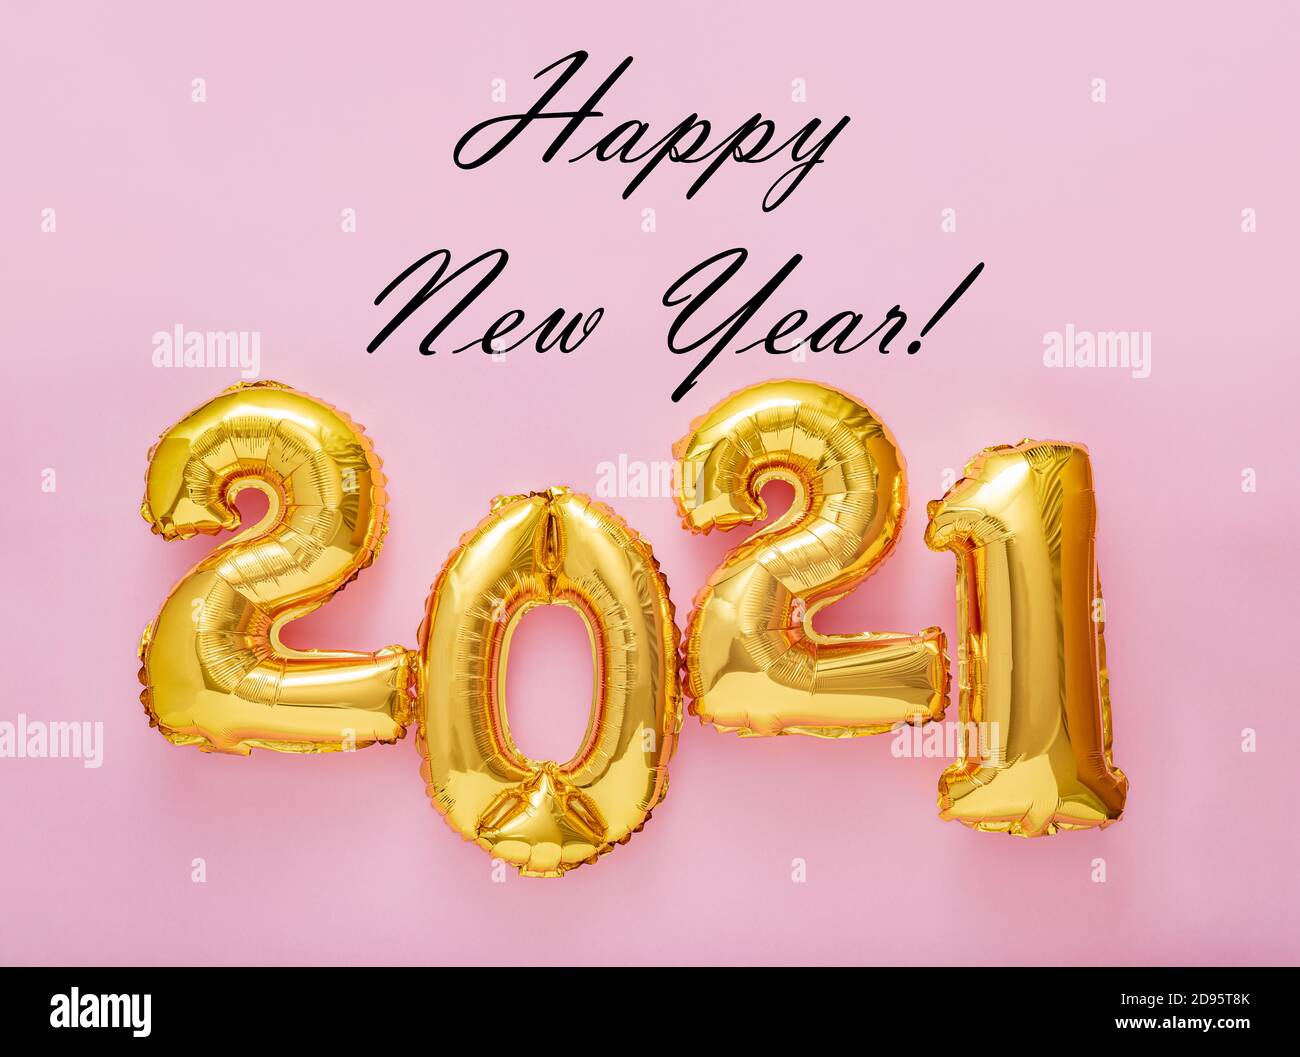 Happy New year black text with gold foil balloons 2021 on pink background. New Year eve invitation 2021 card. Square flat lay Stock Photo